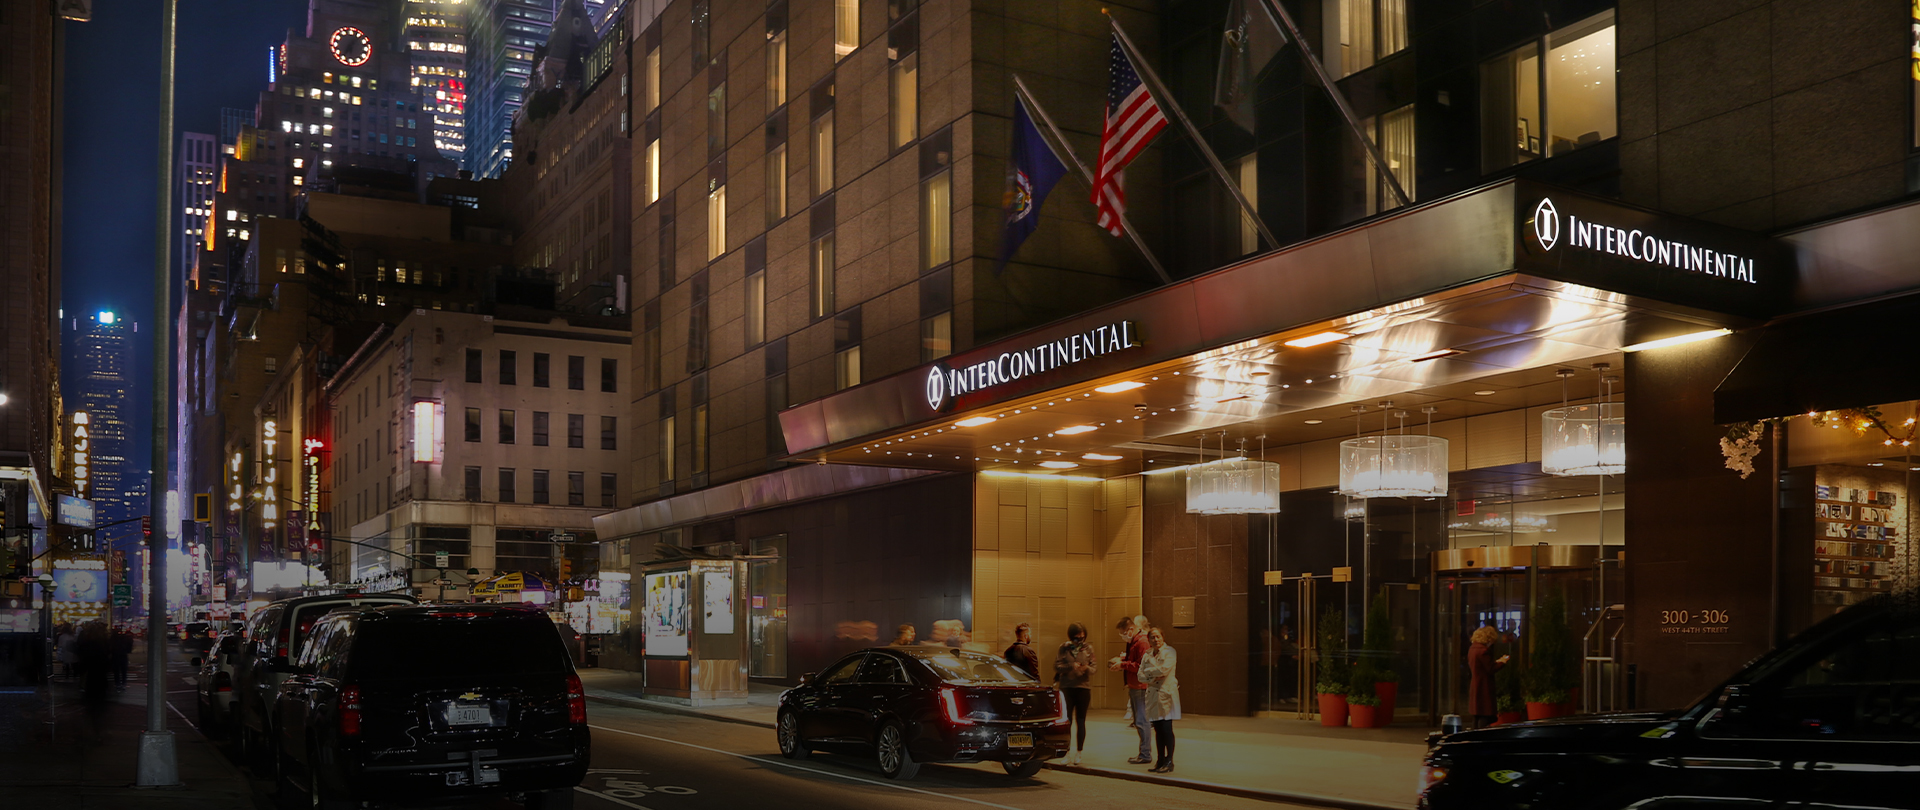 intercontinental hotel exterior view. cards driving by, people walking nearby, new york city in the night time